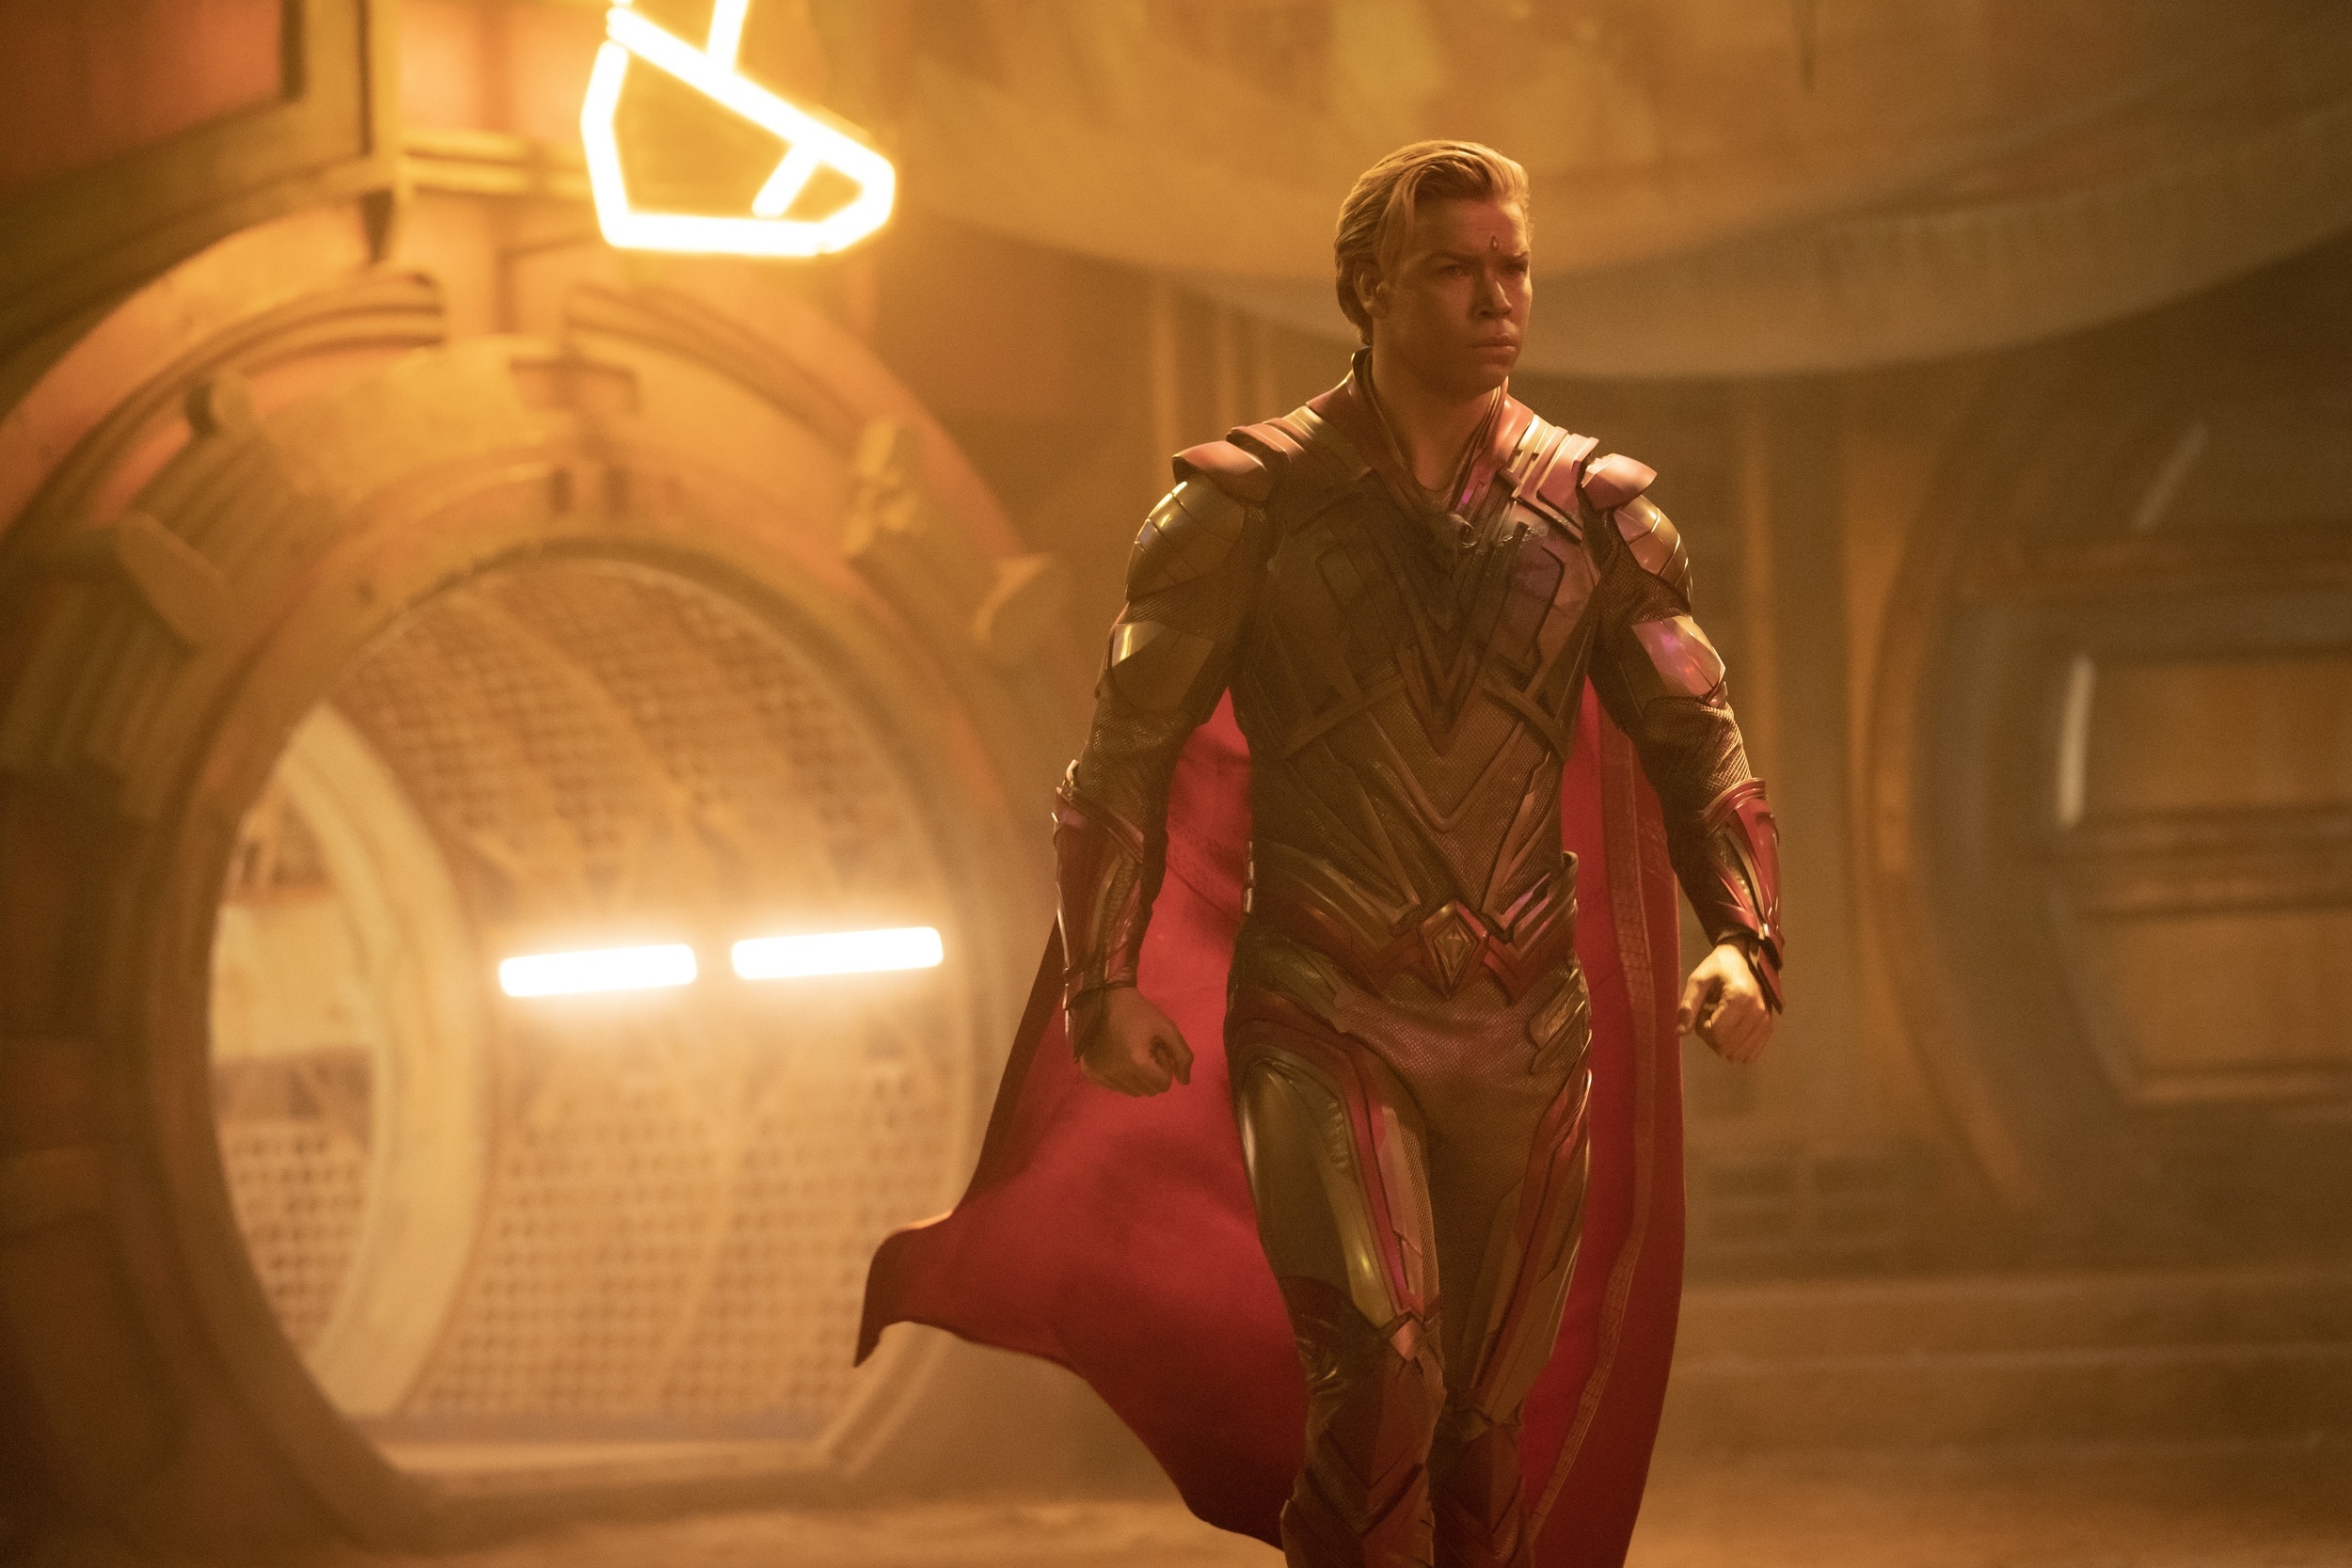 <p>Building off the tease of Adam Warlock at the end of “Vol. 2,” somebody needed to be cast in the role, as we never actually saw him in the second film. George MacKay and Rege-Jean Page were also in the mix for what was an “untitled character,” but as Will Poulter worked toward getting the role, he was given more and more information about the character of Adam.</p><p><a href='https://www.msn.com/en-us/community/channel/vid-cj9pqbr0vn9in2b6ddcd8sfgpfq6x6utp44fssrv6mc2gtybw0us'>Follow us on MSN to see more of our exclusive entertainment content.</a></p>